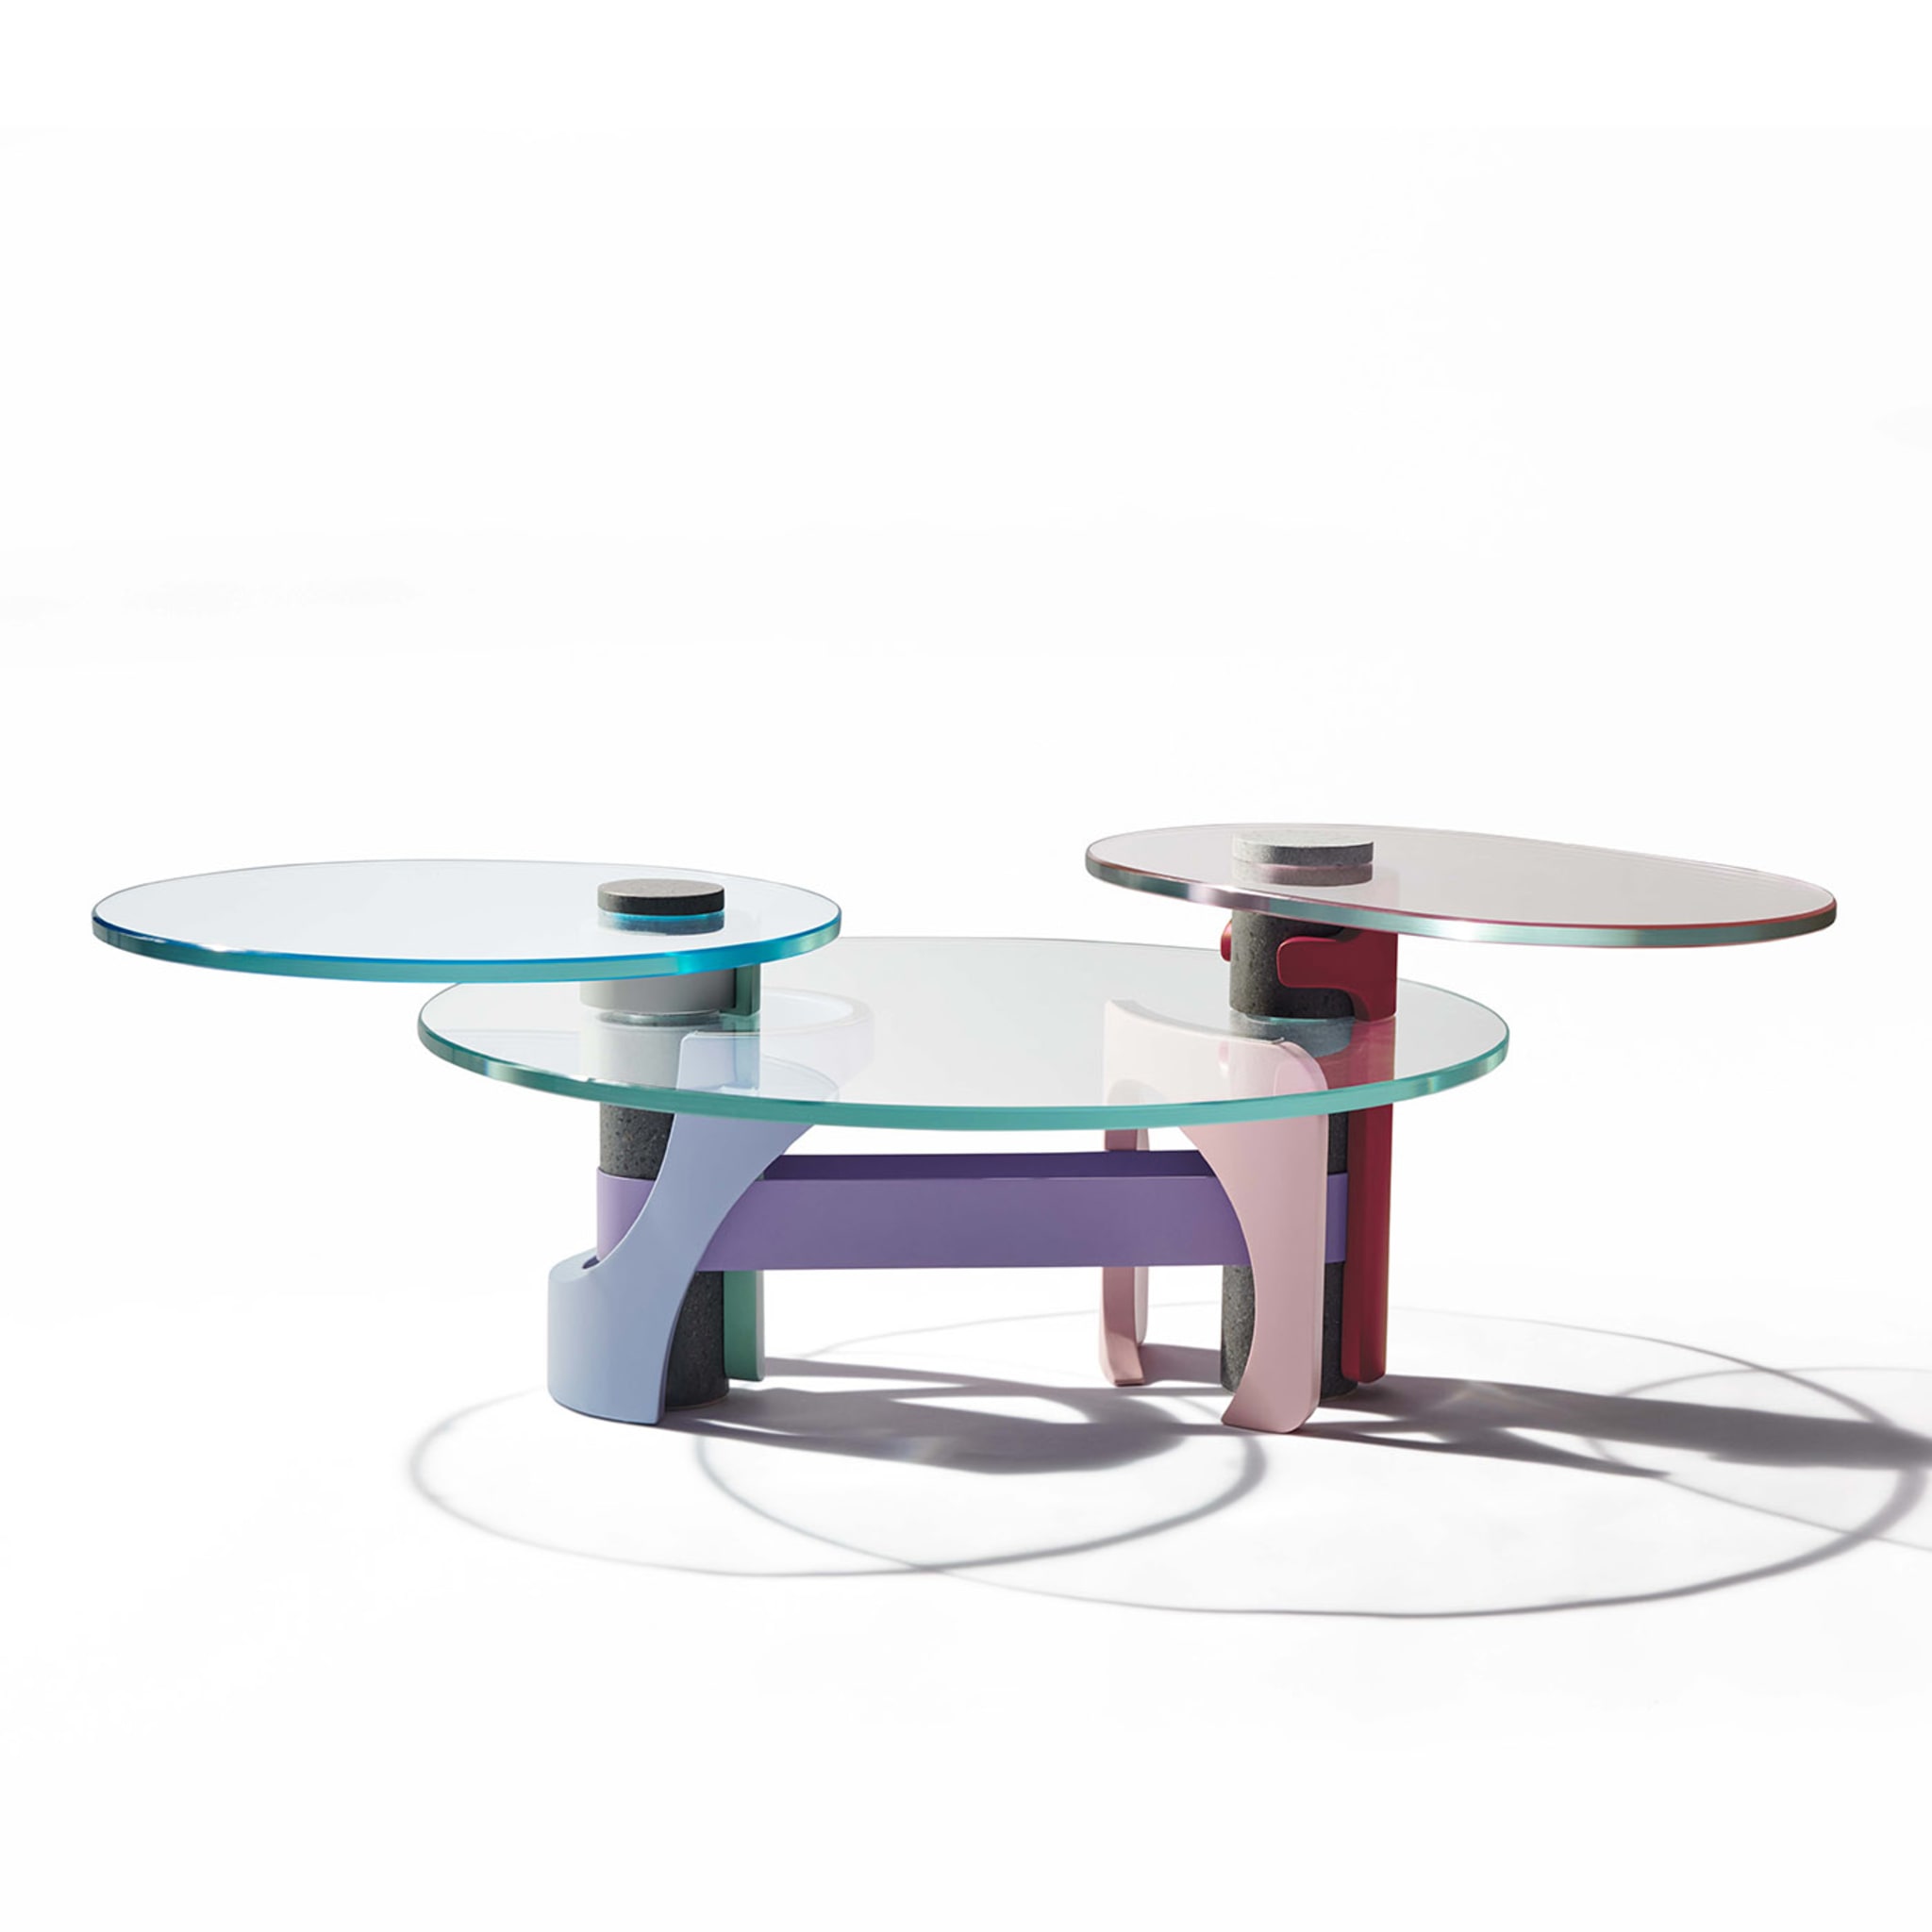 Efesto Sculptural Coffee Table Limited Edition by Elena Salmistraro Limited Edition - Alternative view 4